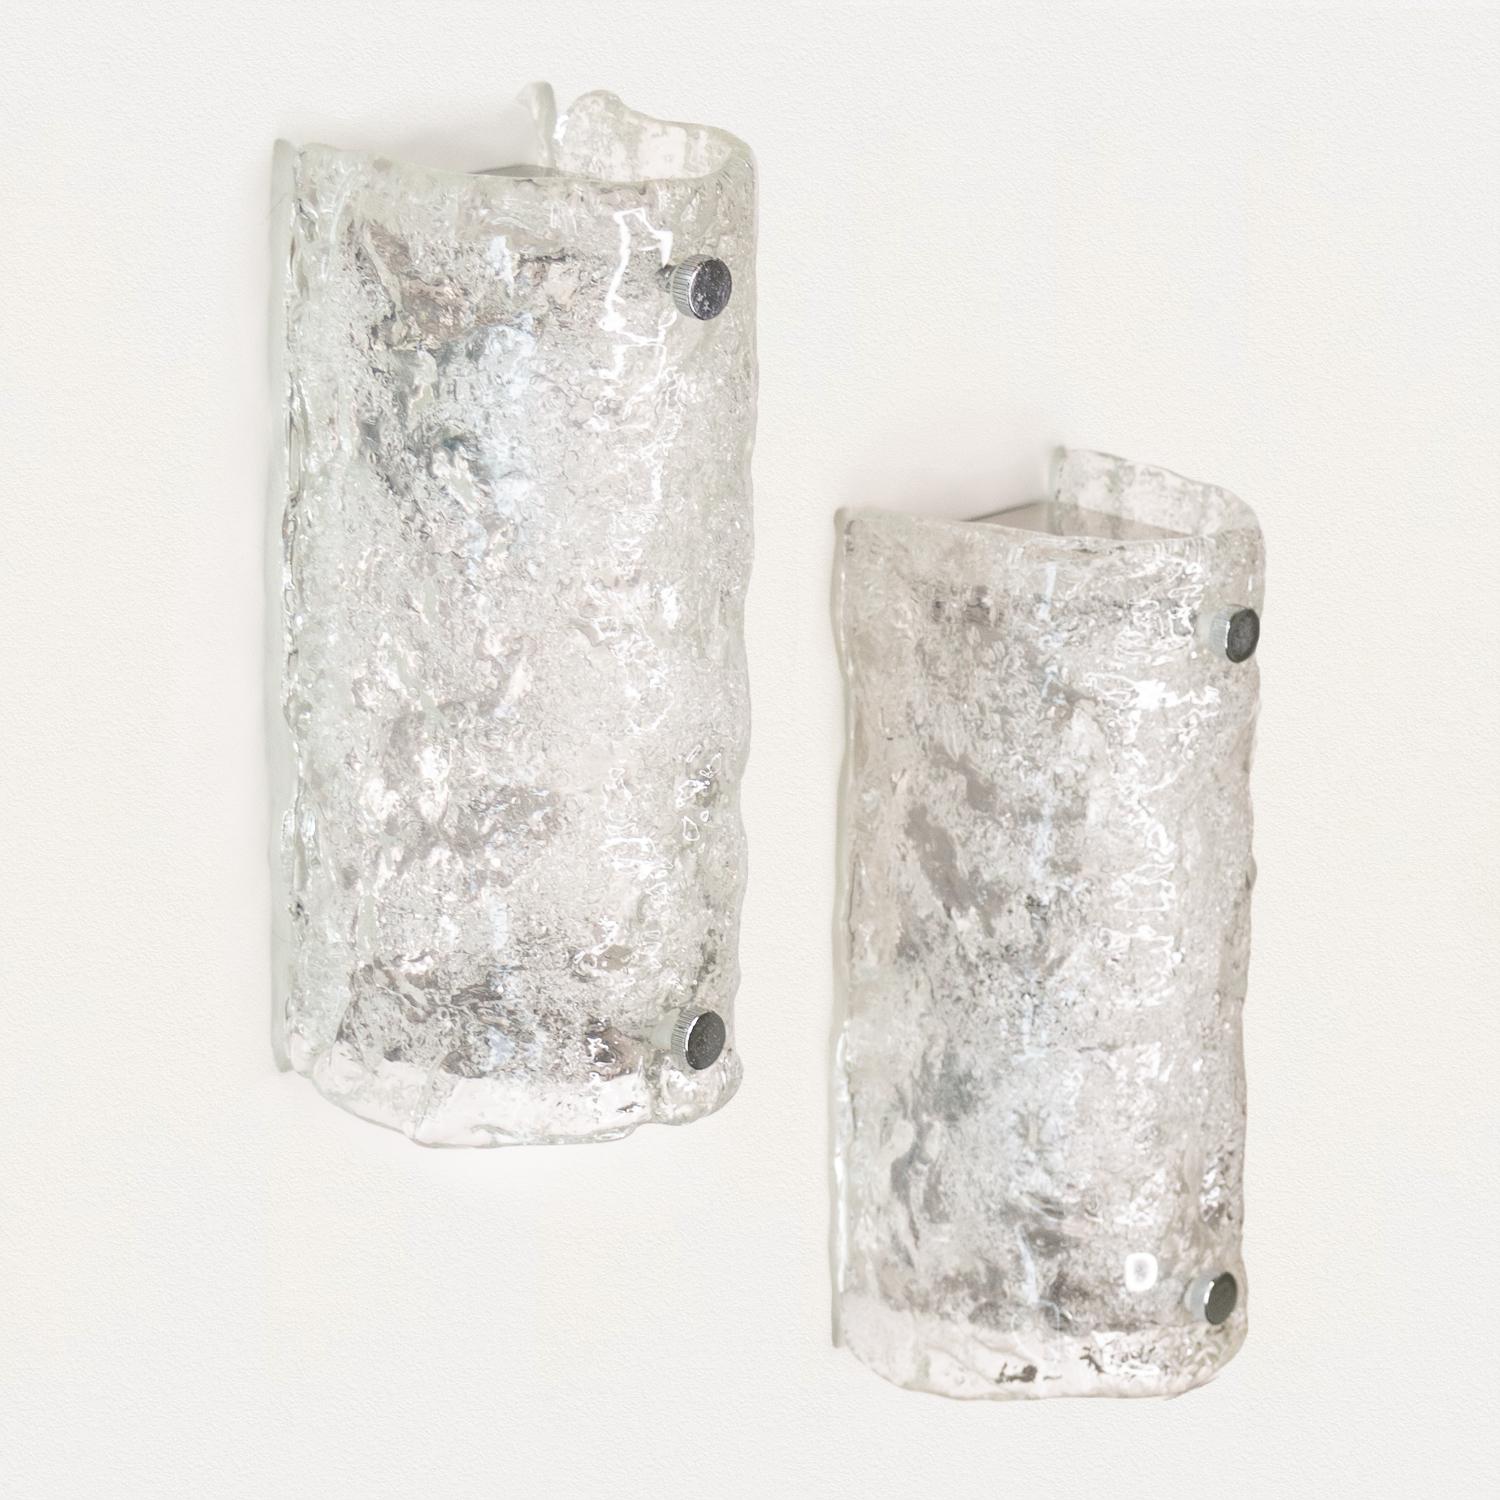 Beautiful pair of Kalmar glass sconces. Thick clear textured glass in rectangular tube form with chrome backplate. Newly re-wired with single socket in each sconce. Great for powder room. Each takes one E12 base bulb, up to 25 W or higher with